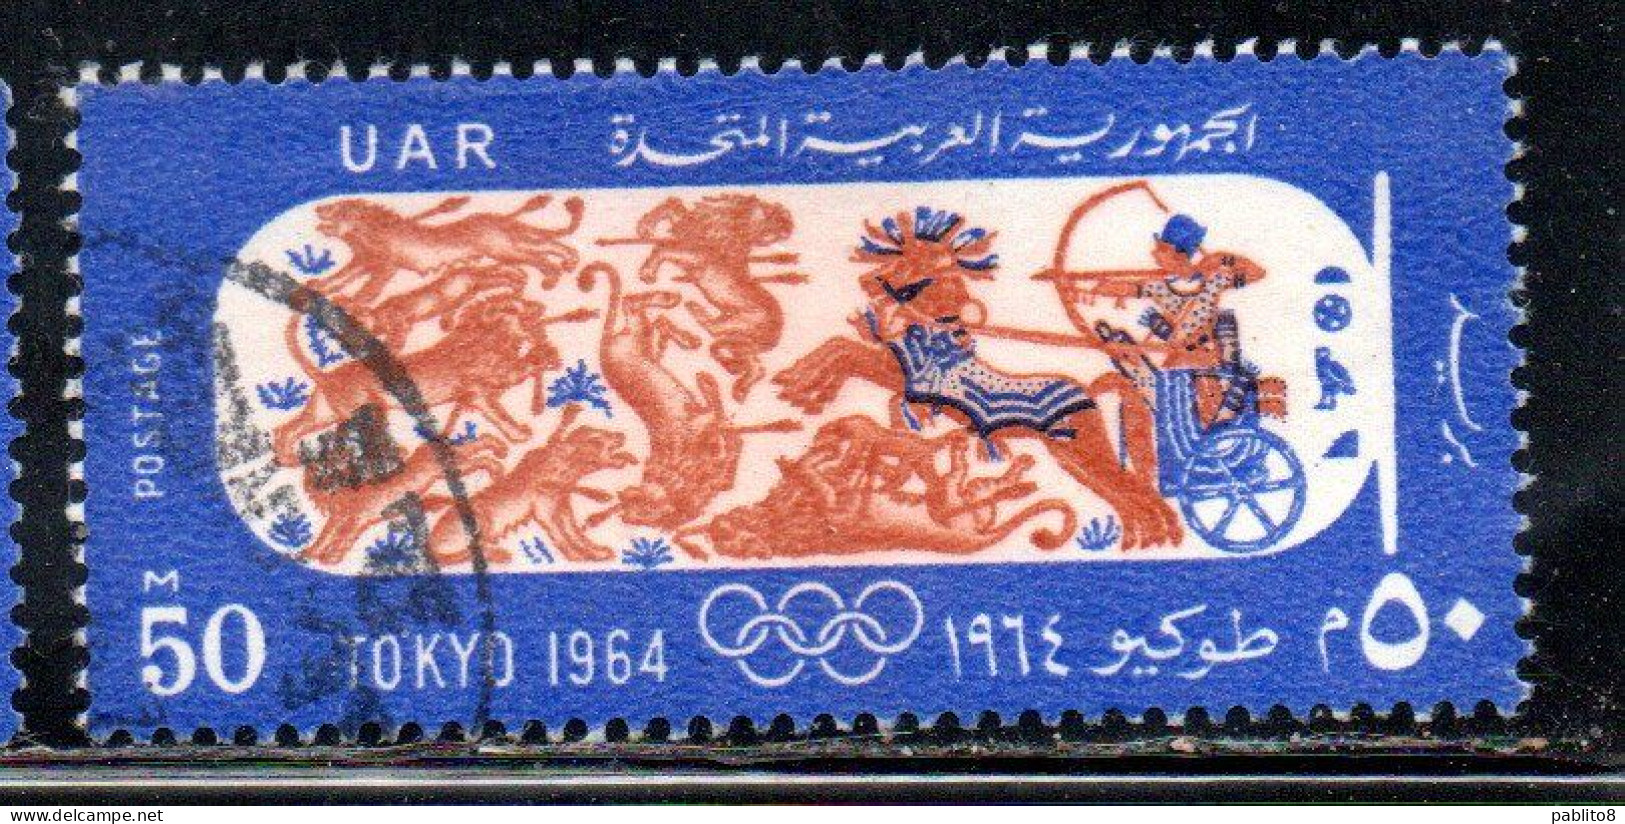 UAR EGYPT EGITTO 1964 OLYMIC GAMES TOKYO PHARAOH IN CHARIOT HUNTING 50m USED USATO OBLITERE' - Used Stamps